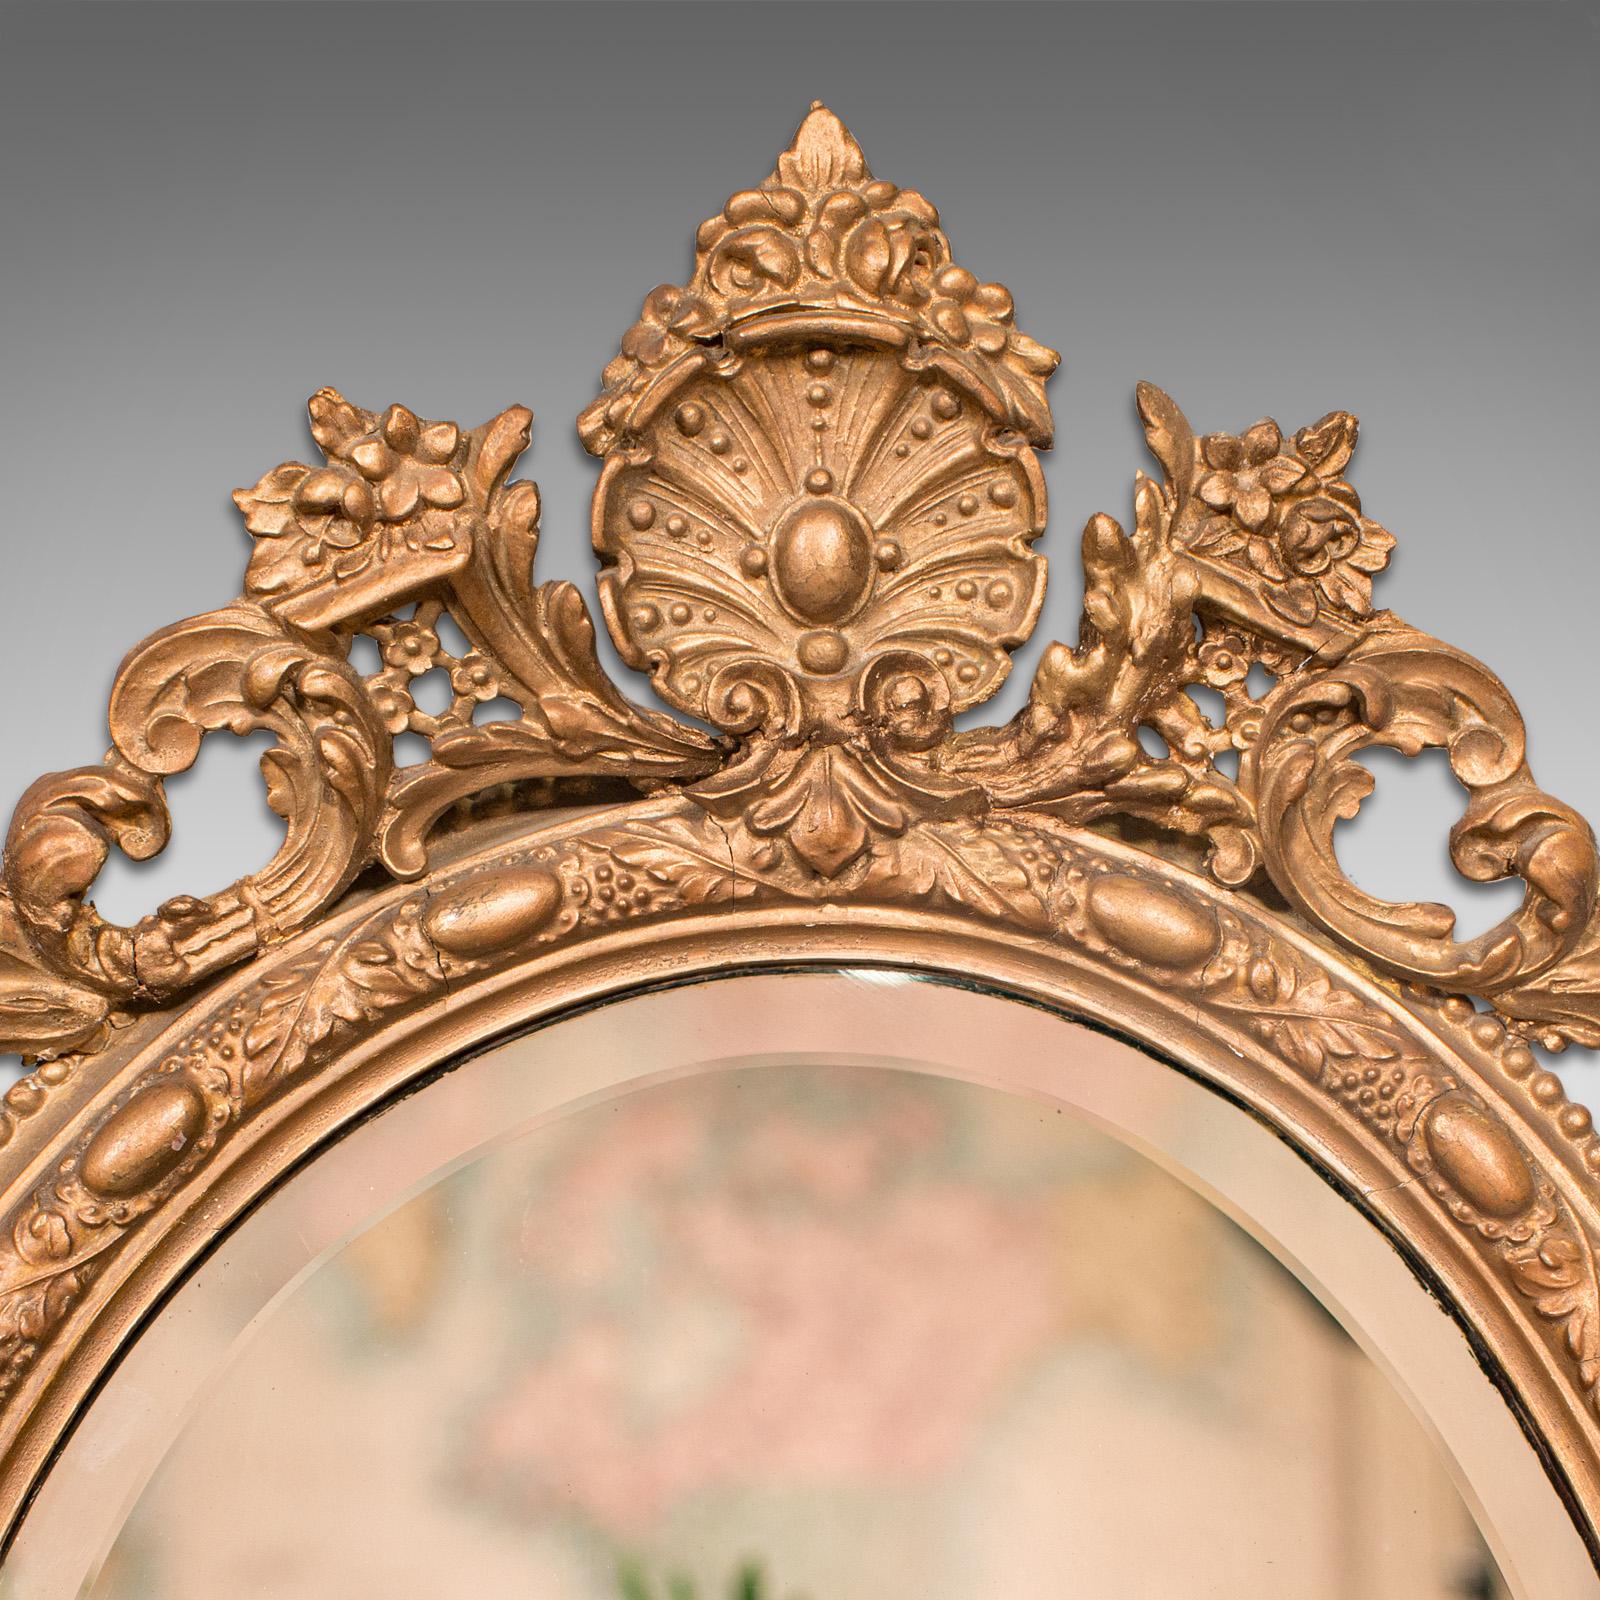 19th Century Antique Ornate Wall Mirror, French, Gilt Gesso, Bevelled Glass, Victorian, 1900 For Sale